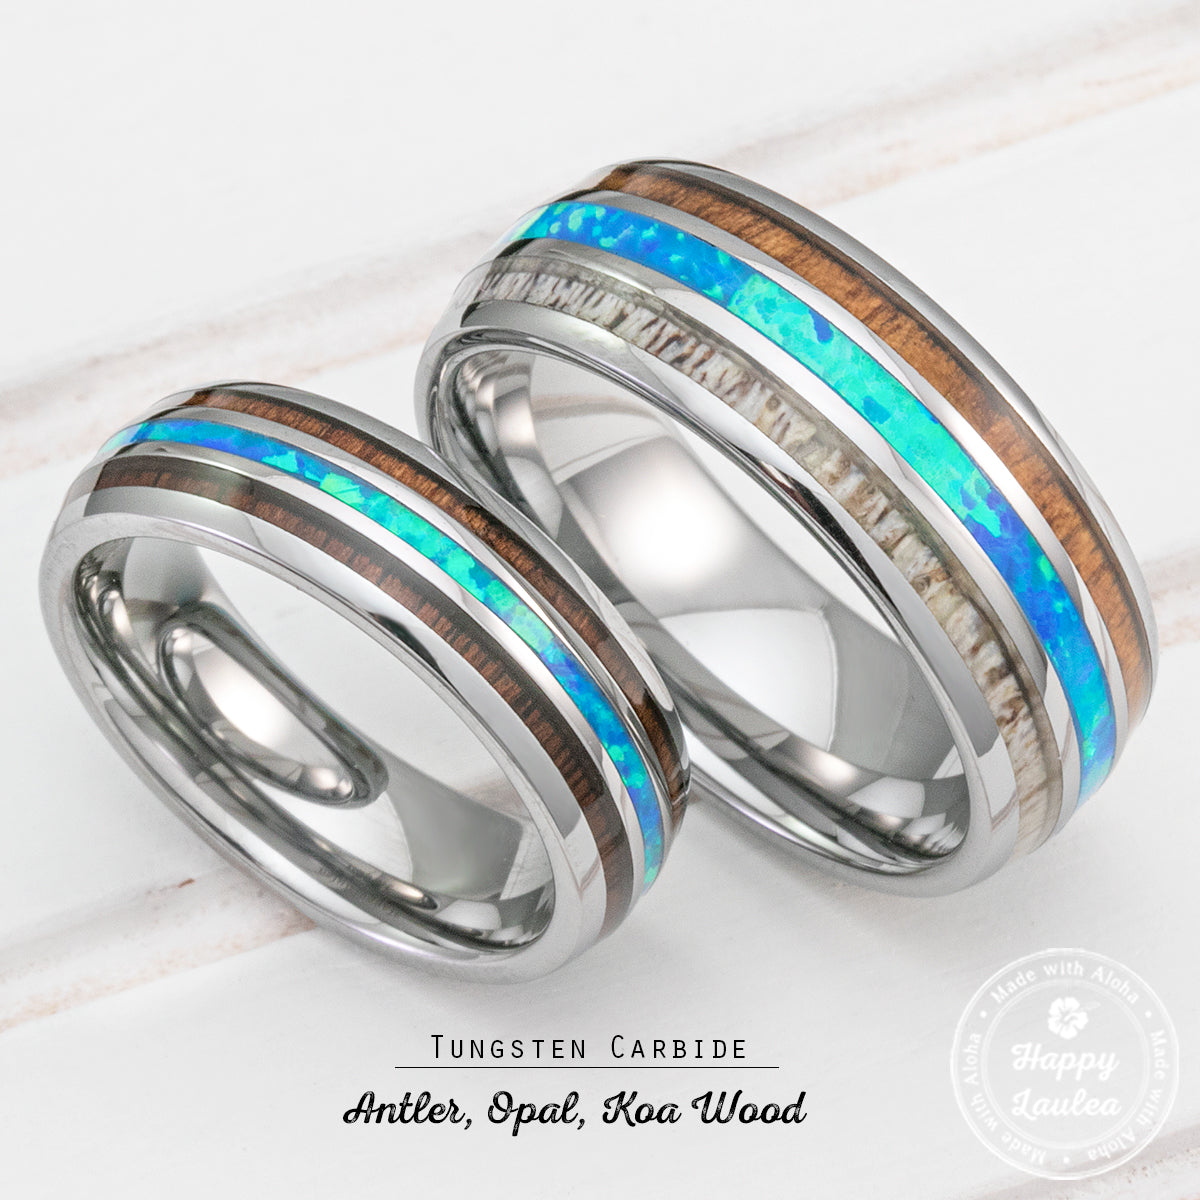 Pair of Assorted Tungsten Carbide Rings with Antler, Opal & Koa Wood Tri Inlay - 6&8mm, Dome Shape, Comfort Fitment